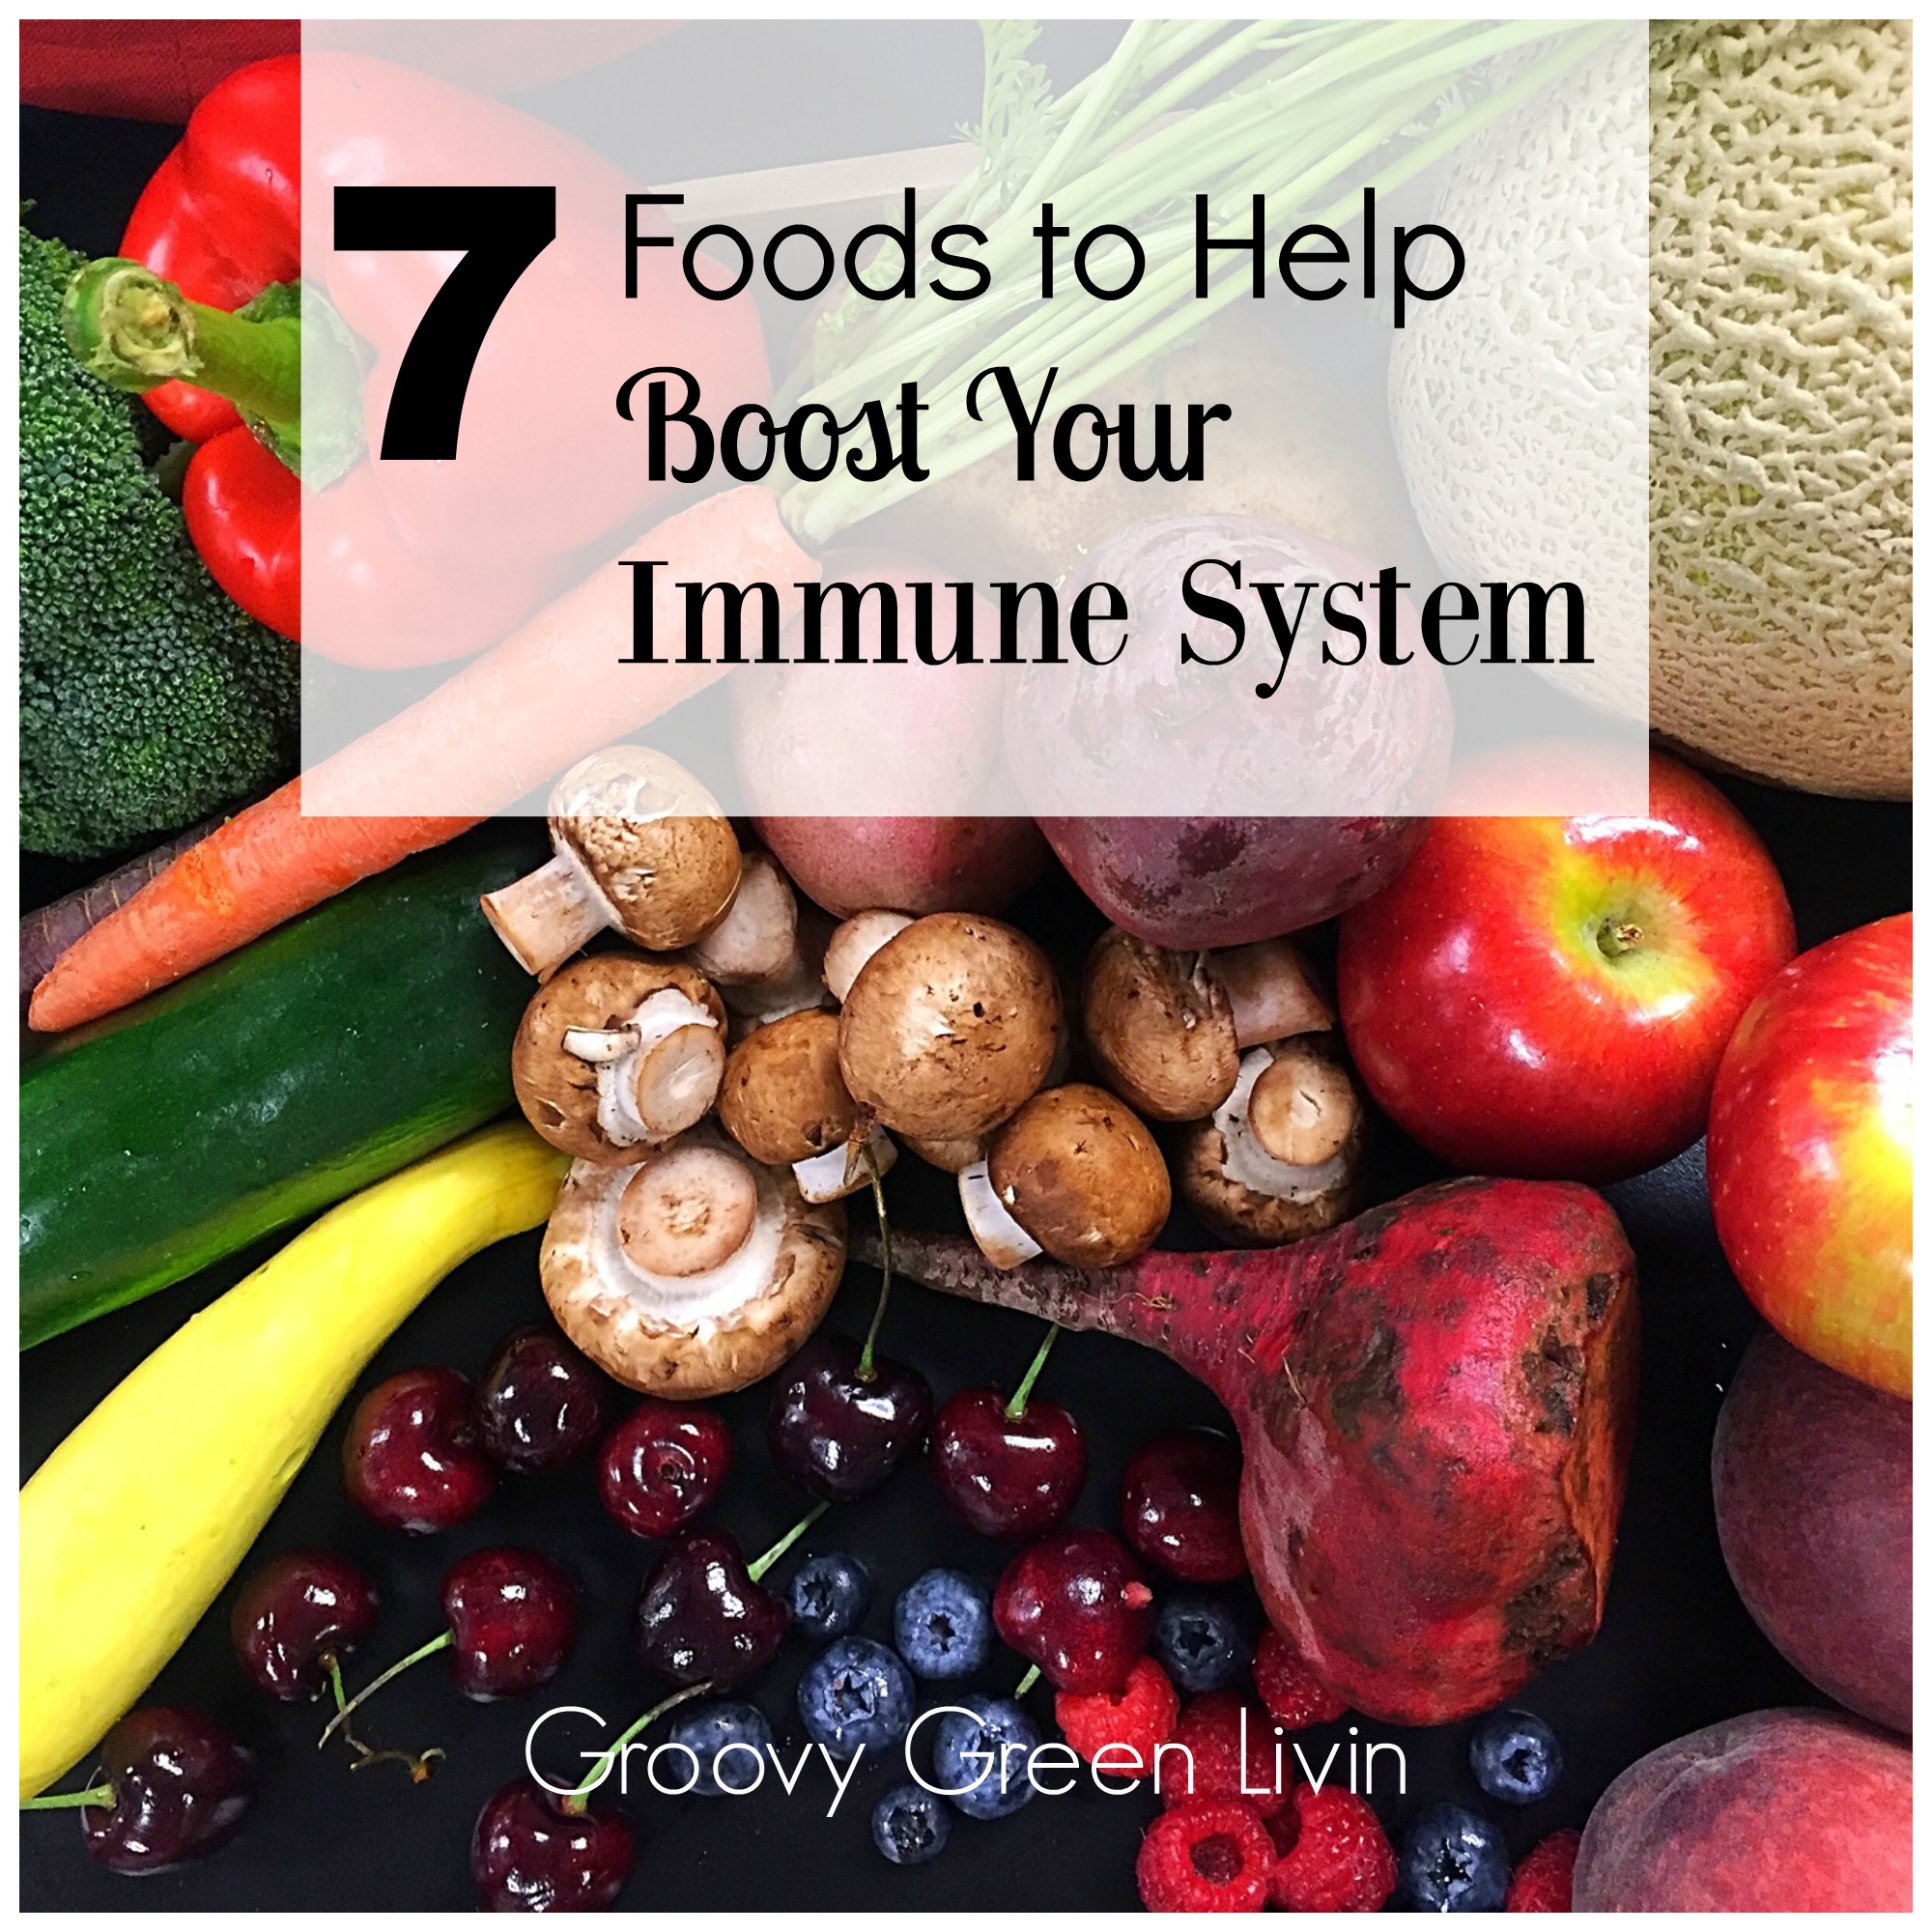 7 Foods to Help Boost Your Immune System